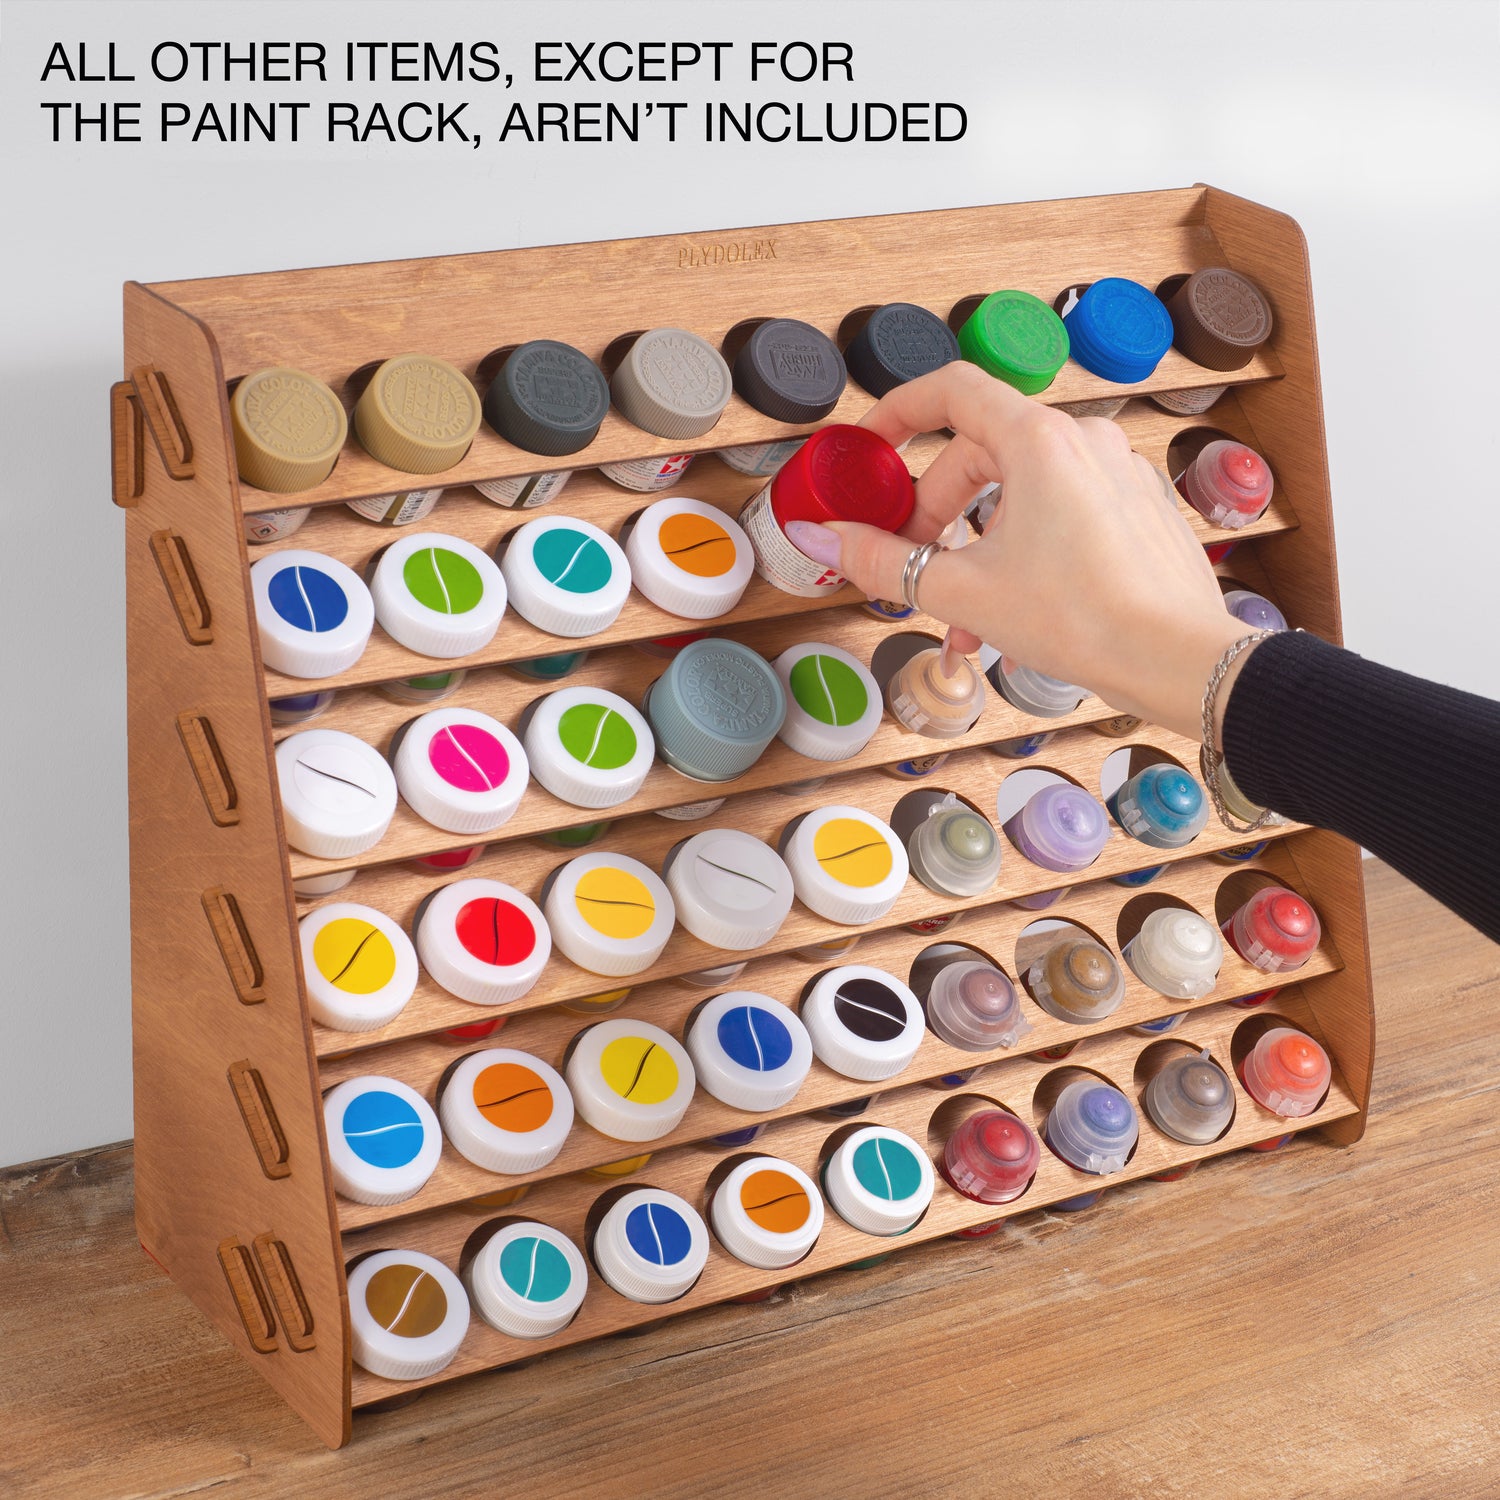 Plydolex Acrylic Paint Rack Organizer with 72 Holes Suitable for Vallejo Paints and Others - Wall-Mounted Paint Rack Ideal for Paint Storage of